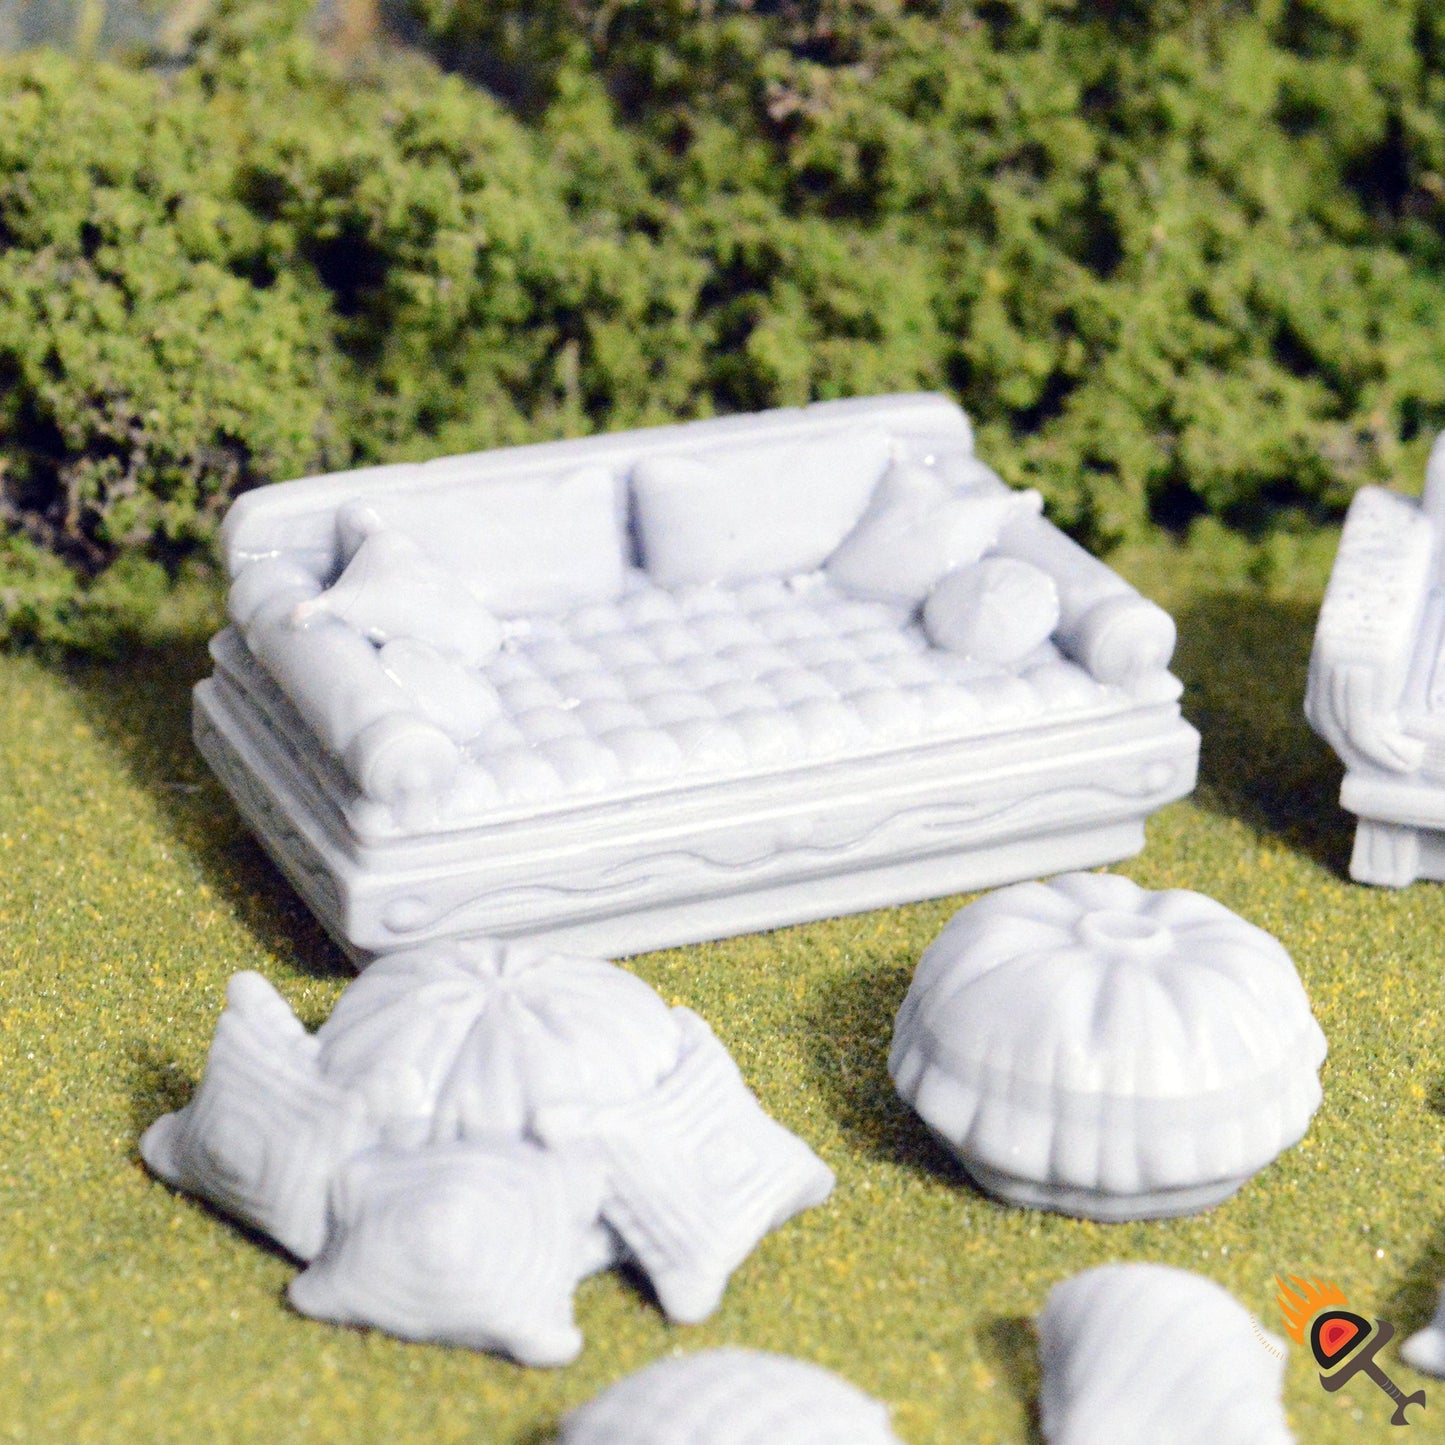 Miniature Couches, Cushions and Pillows 28mm 32mm for D&D Terrain, DnD Pathfinder Desert Palace Furniture